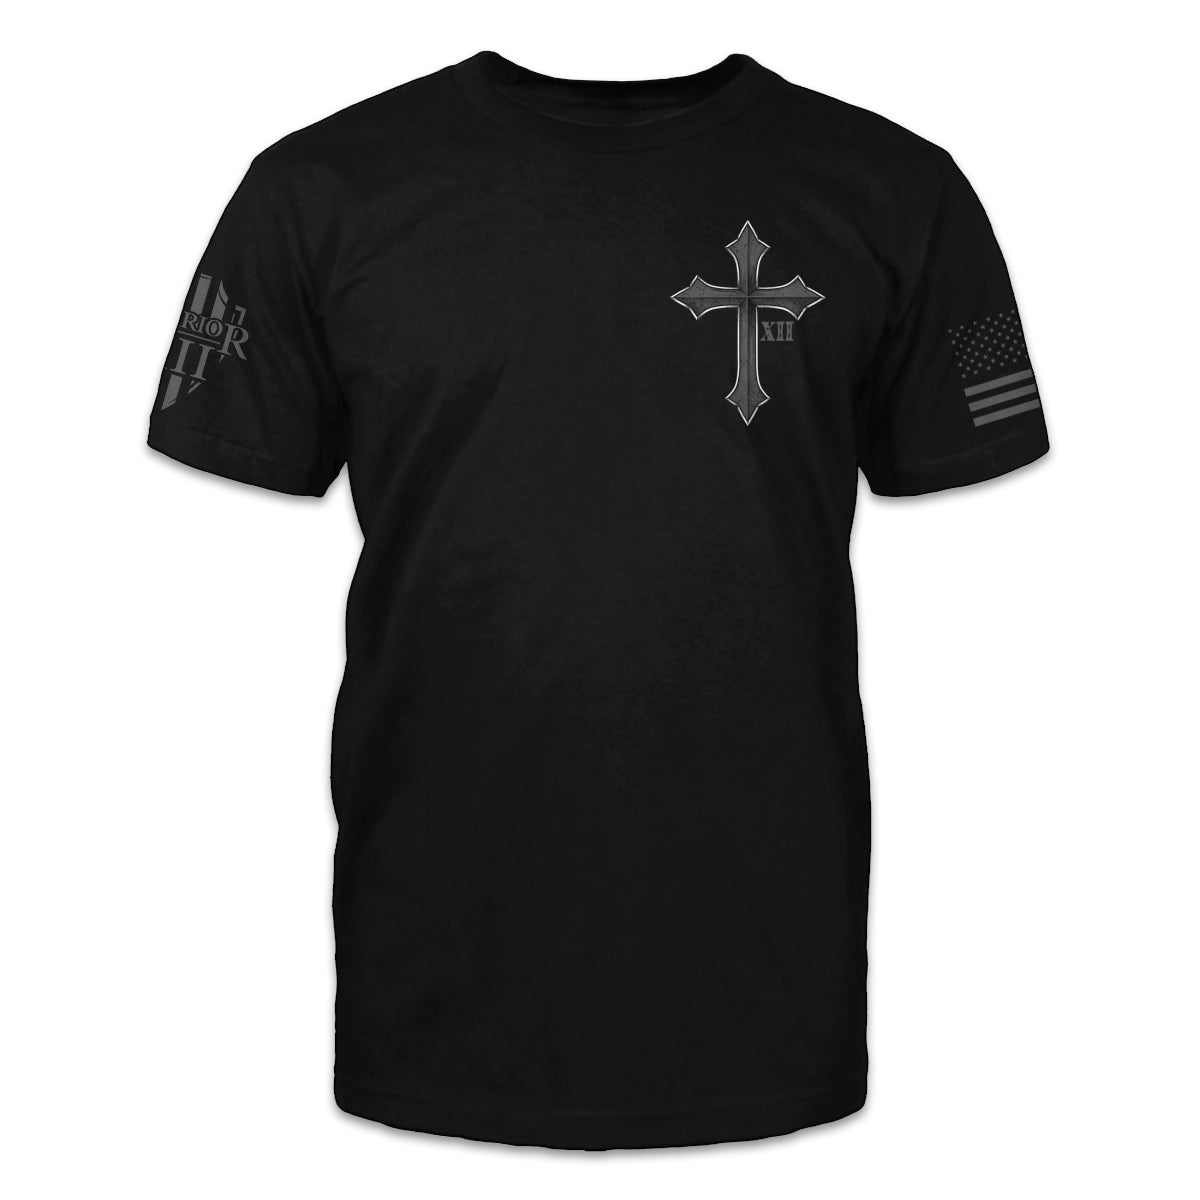 The front of a black t-shirt featuring a small pocket image of a cross